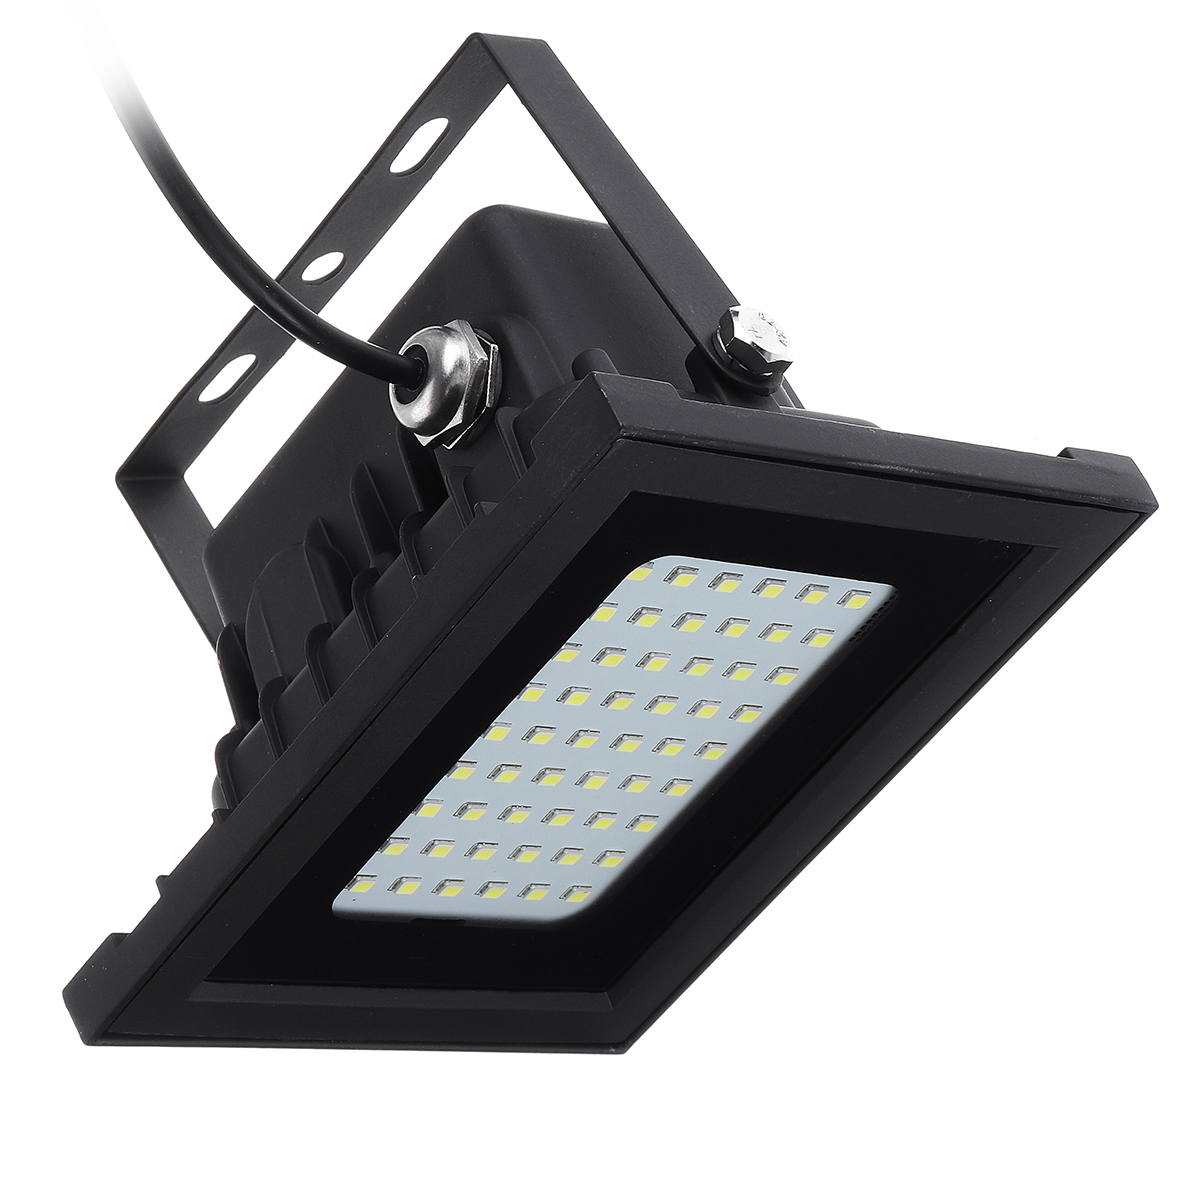 400LM 54 LED Solar Panel Flood Light Spotlight Project Lamp IP65 Waterproof Outdoor Camping Emergency Lantern With Remote Control 14